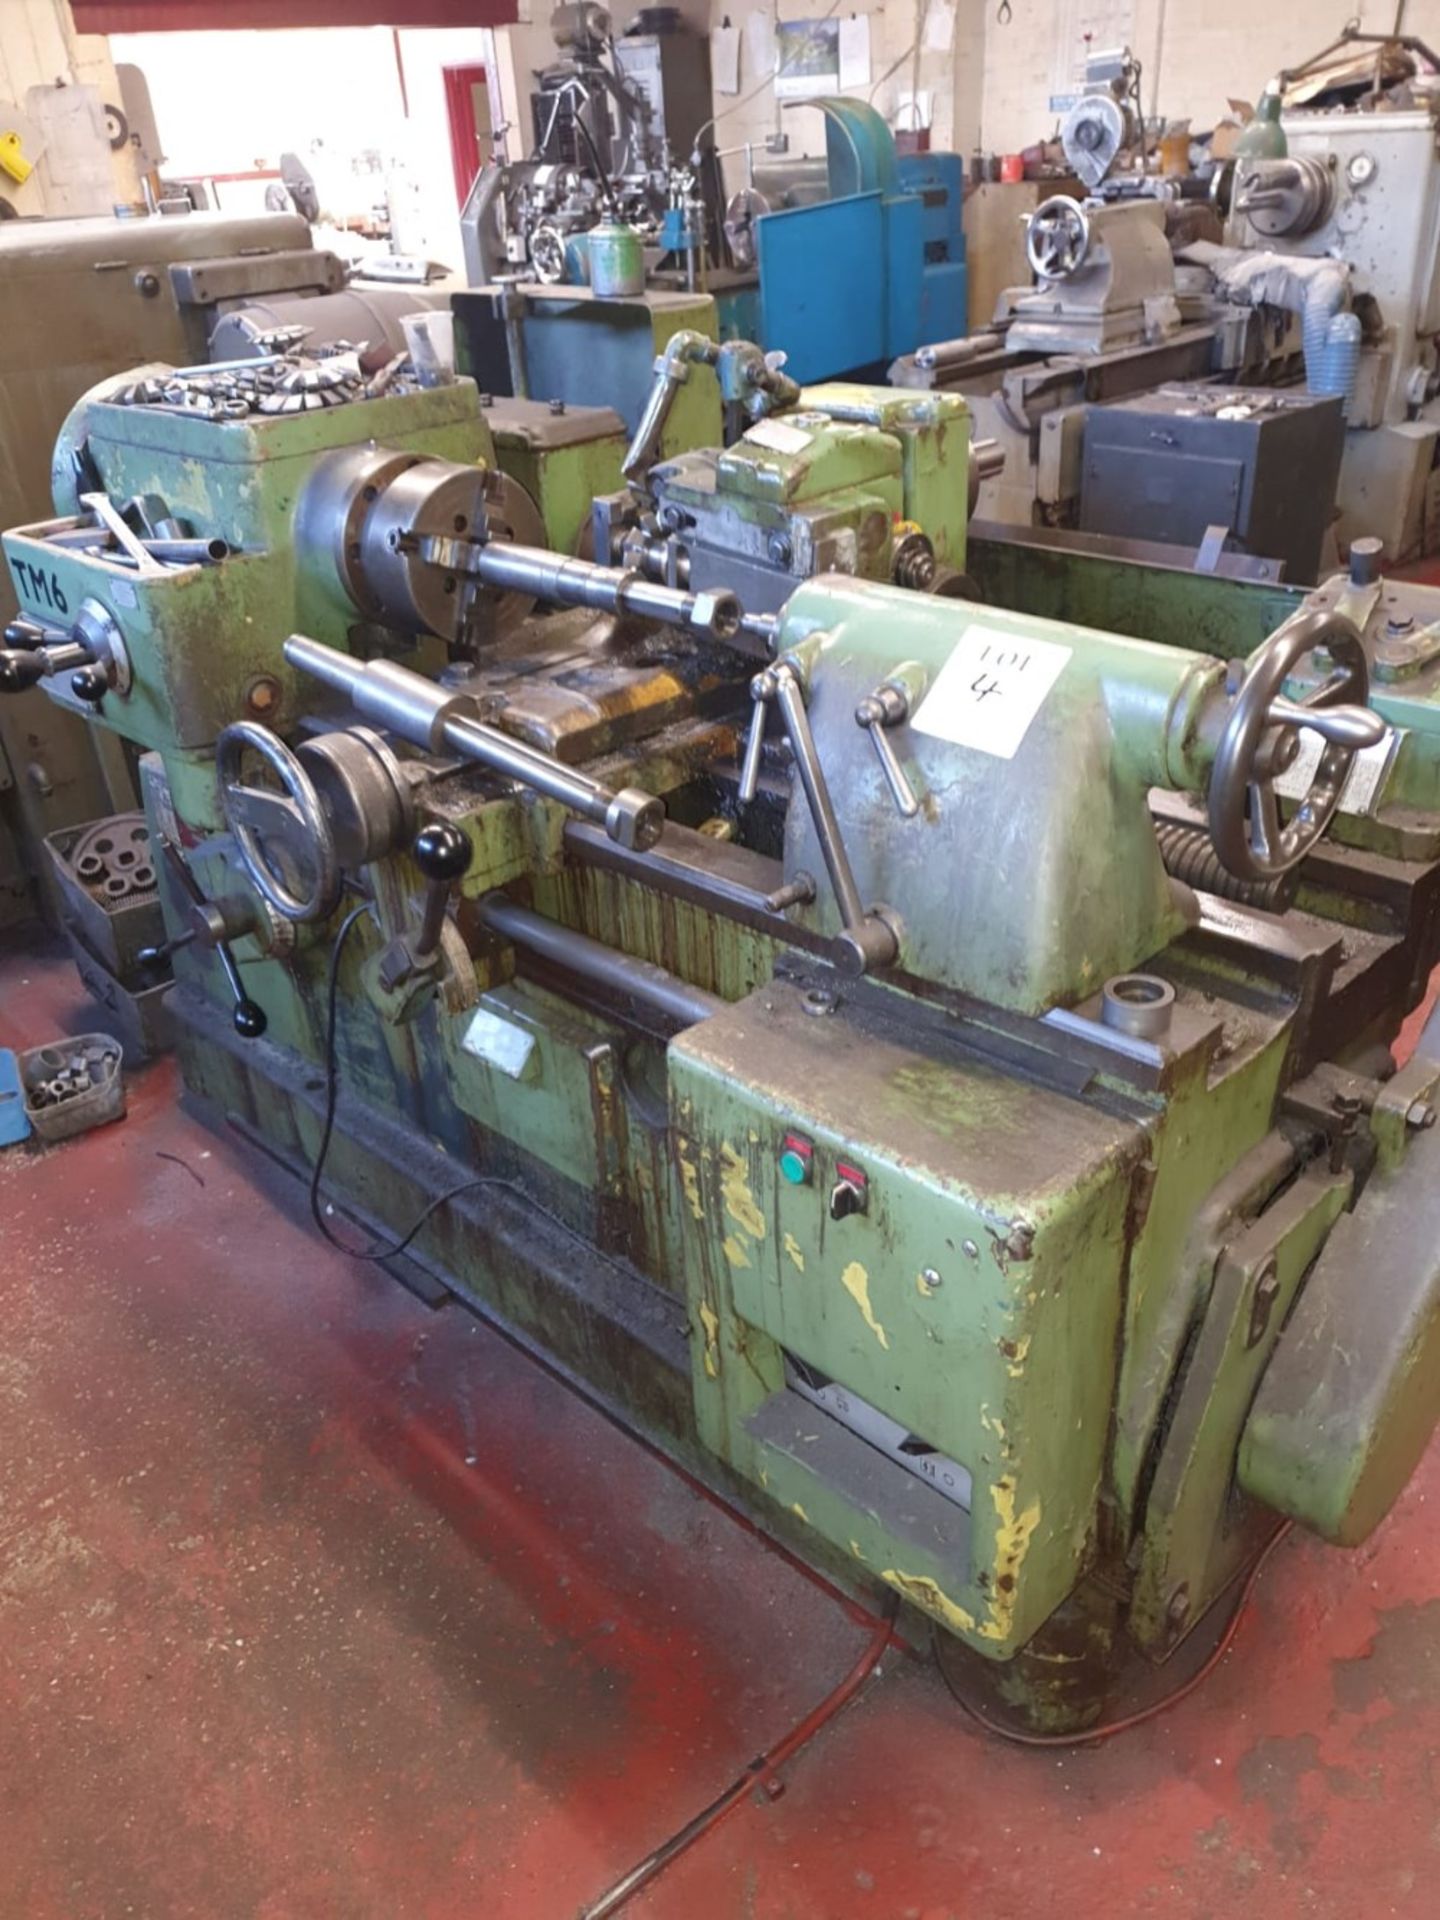 WMW Heckler 6FL 400-600 short bed thread miling machine with various change gears. Serial No. 5472/